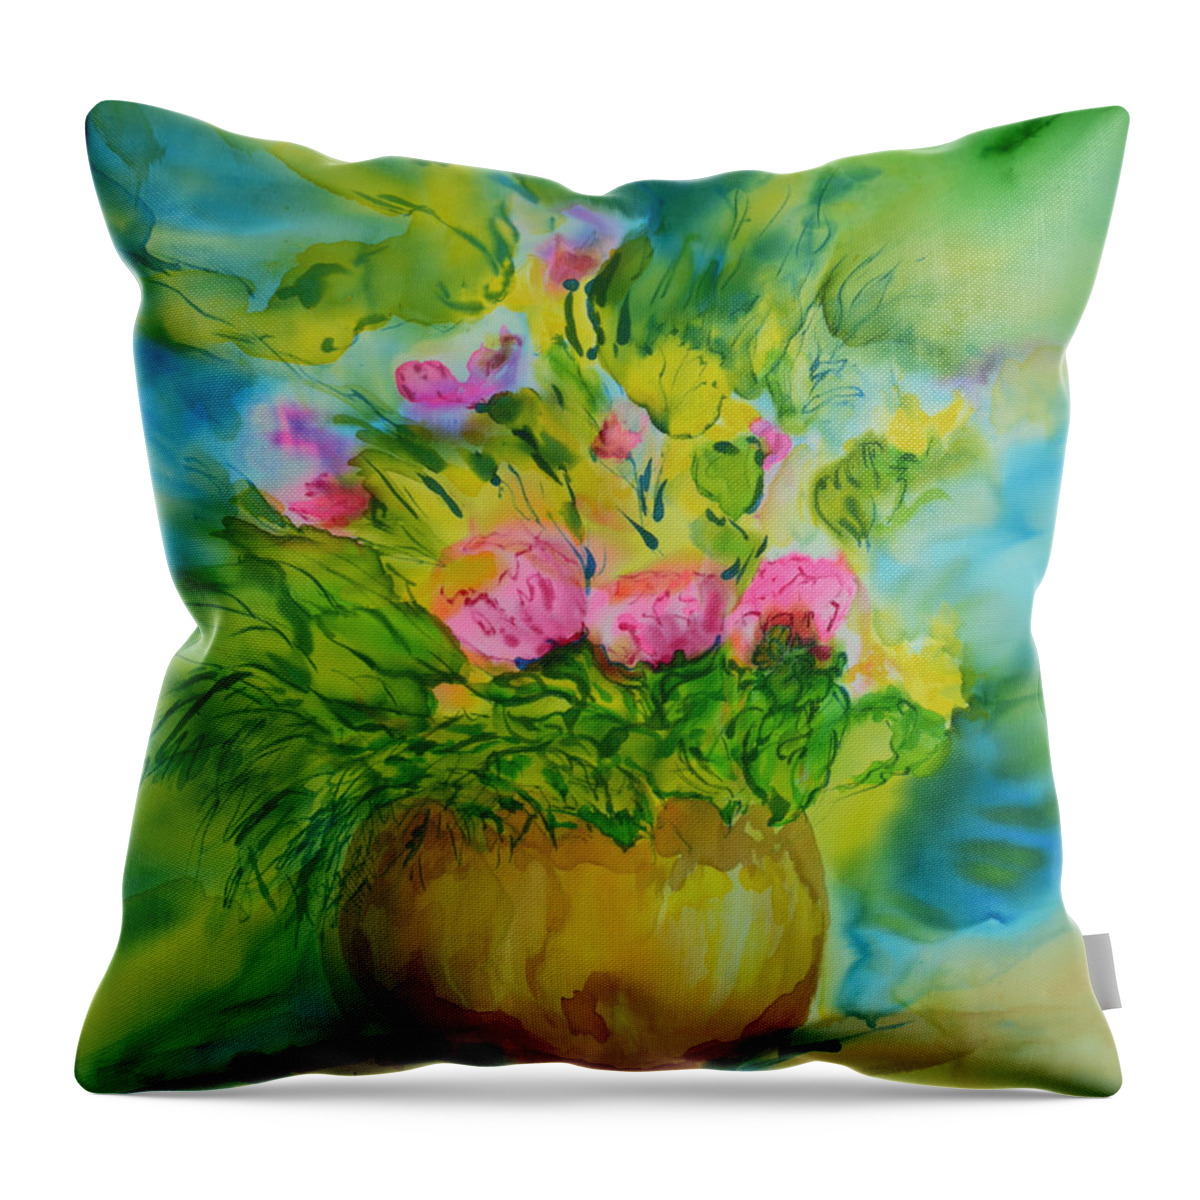 Flowers Throw Pillow featuring the painting Sisters by Susan Moody